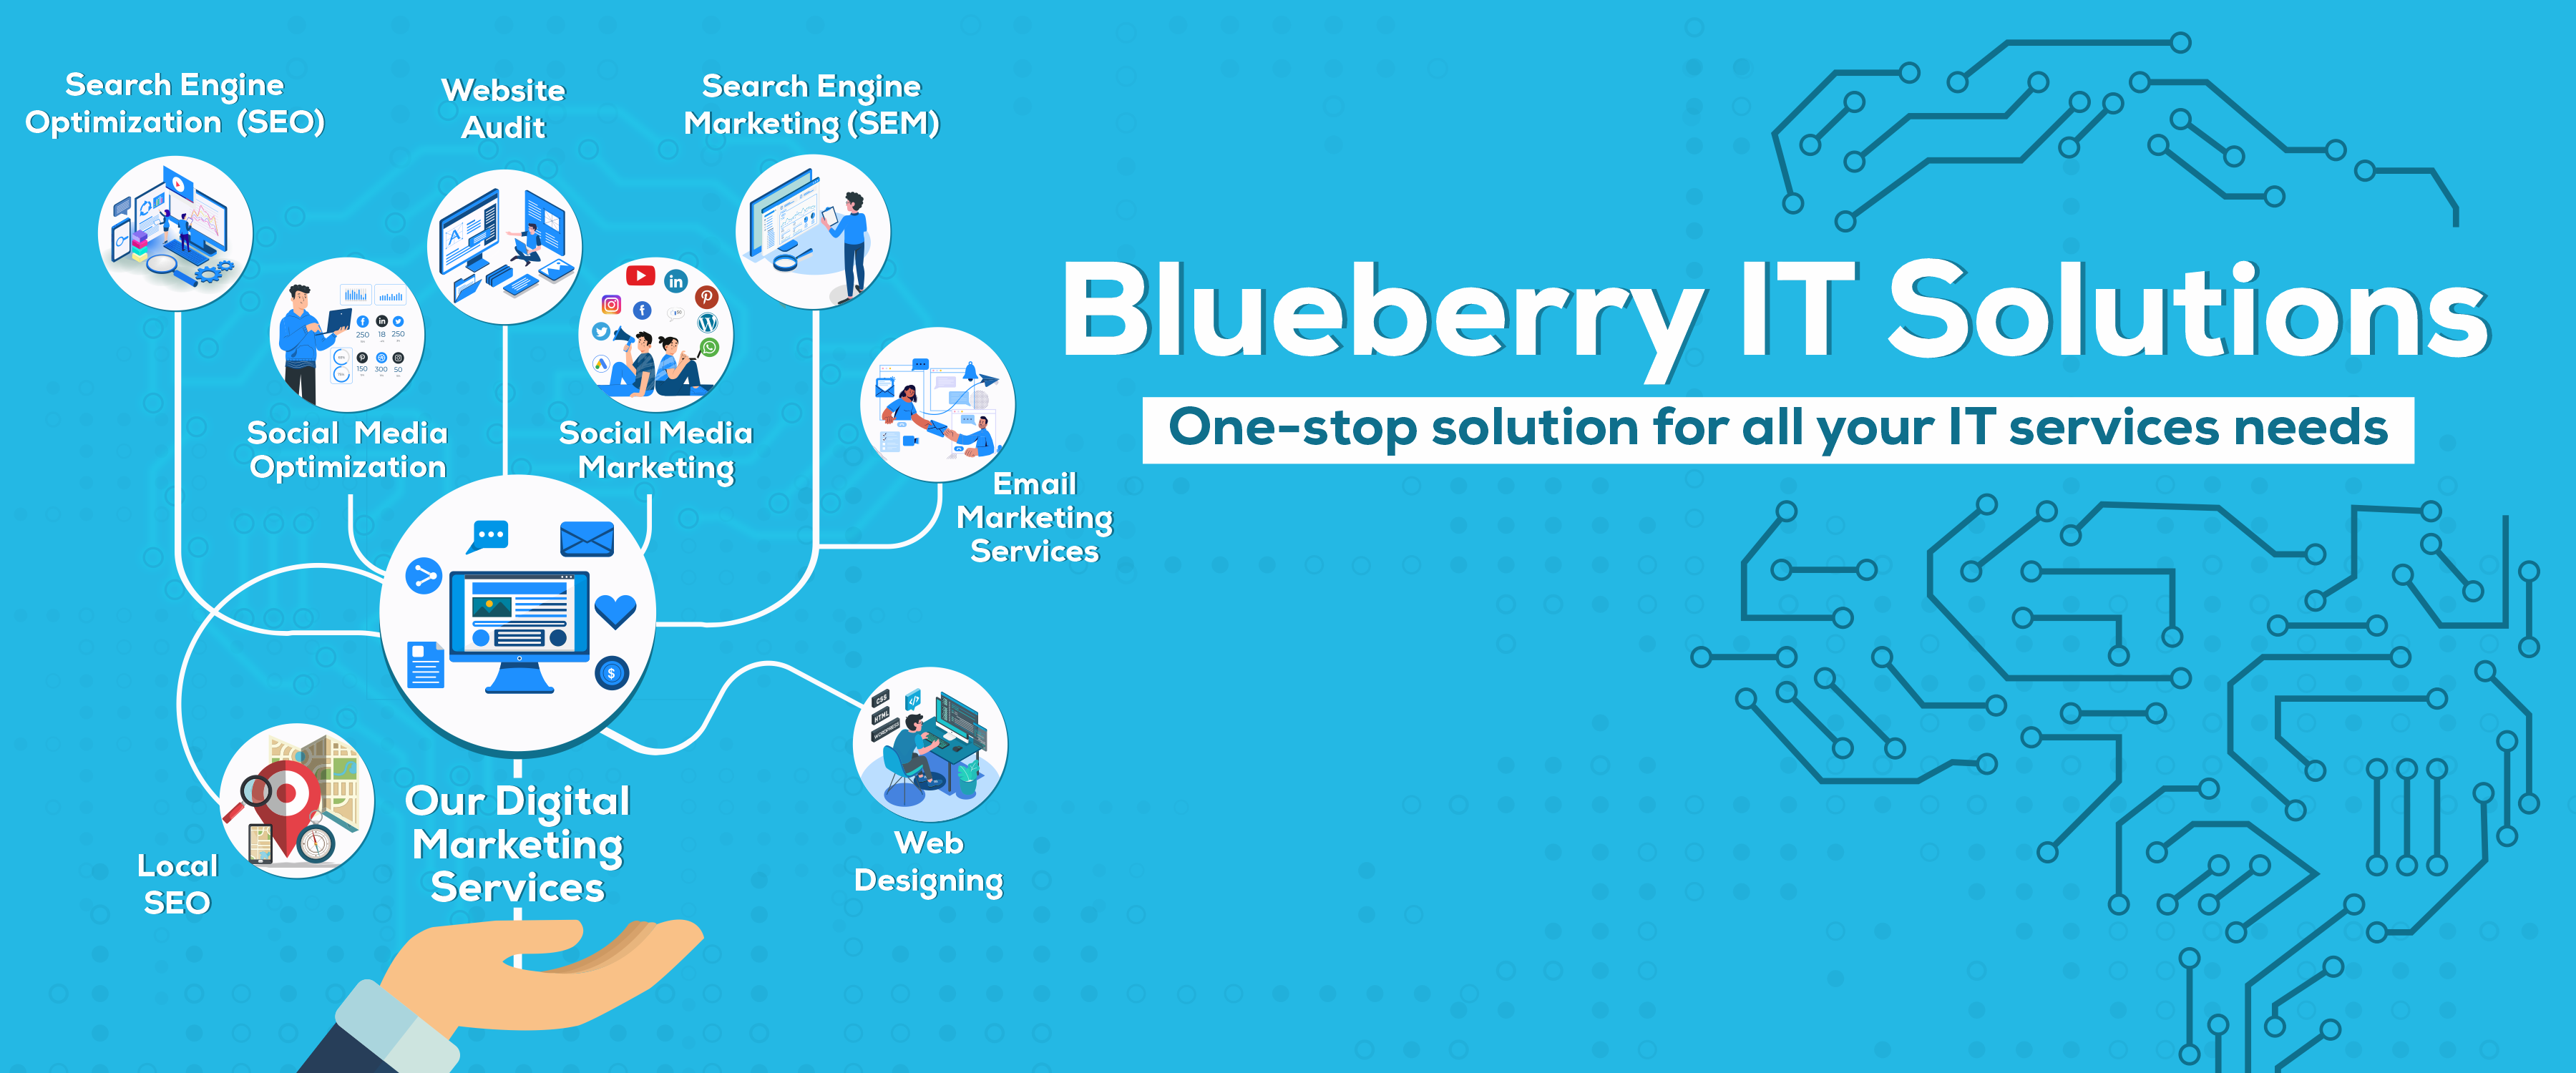 Blueberry IT Solutions banner